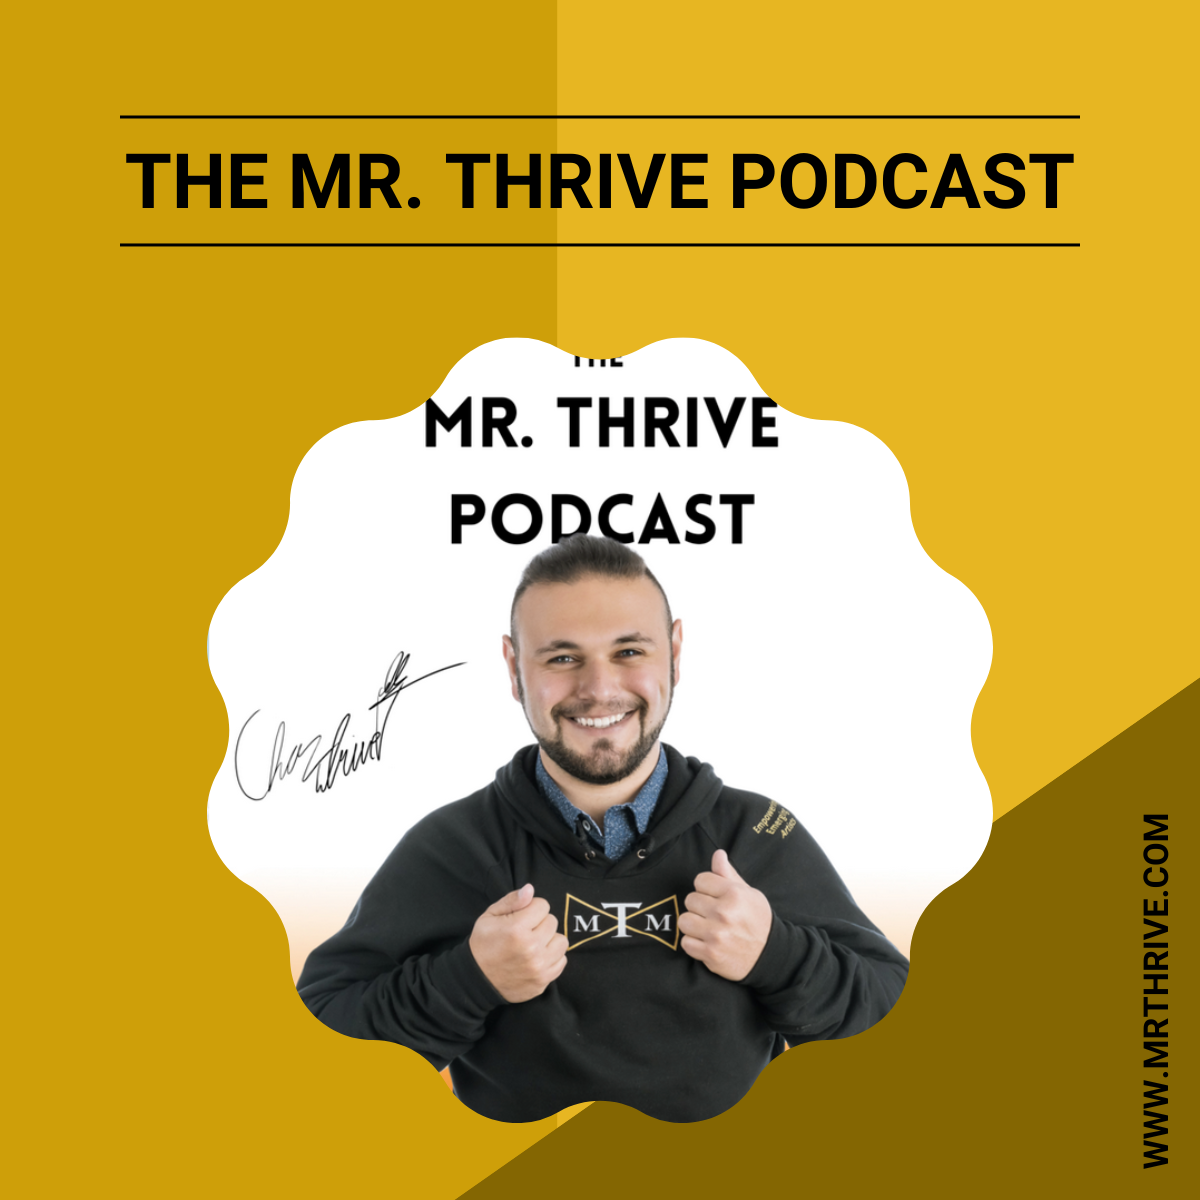 The Mr. Thrive Podcast